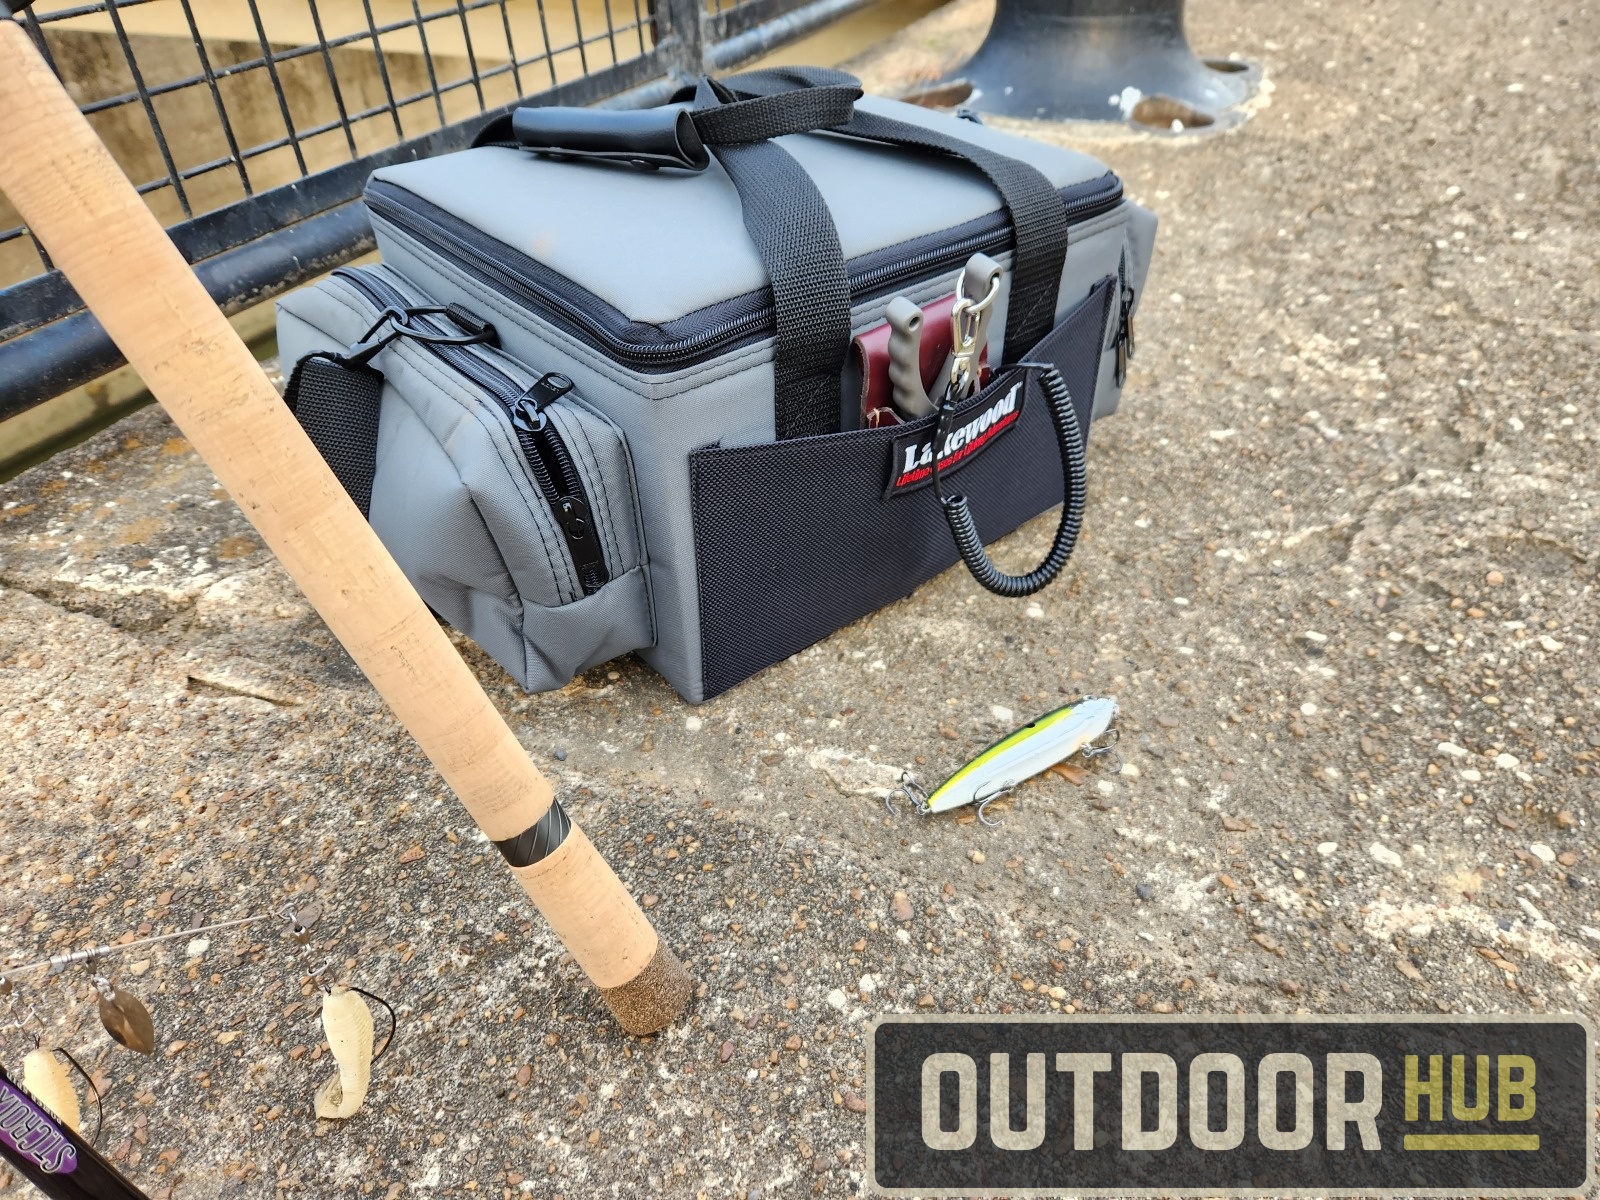 Fishing Tackle Boxes - Lakewood Products